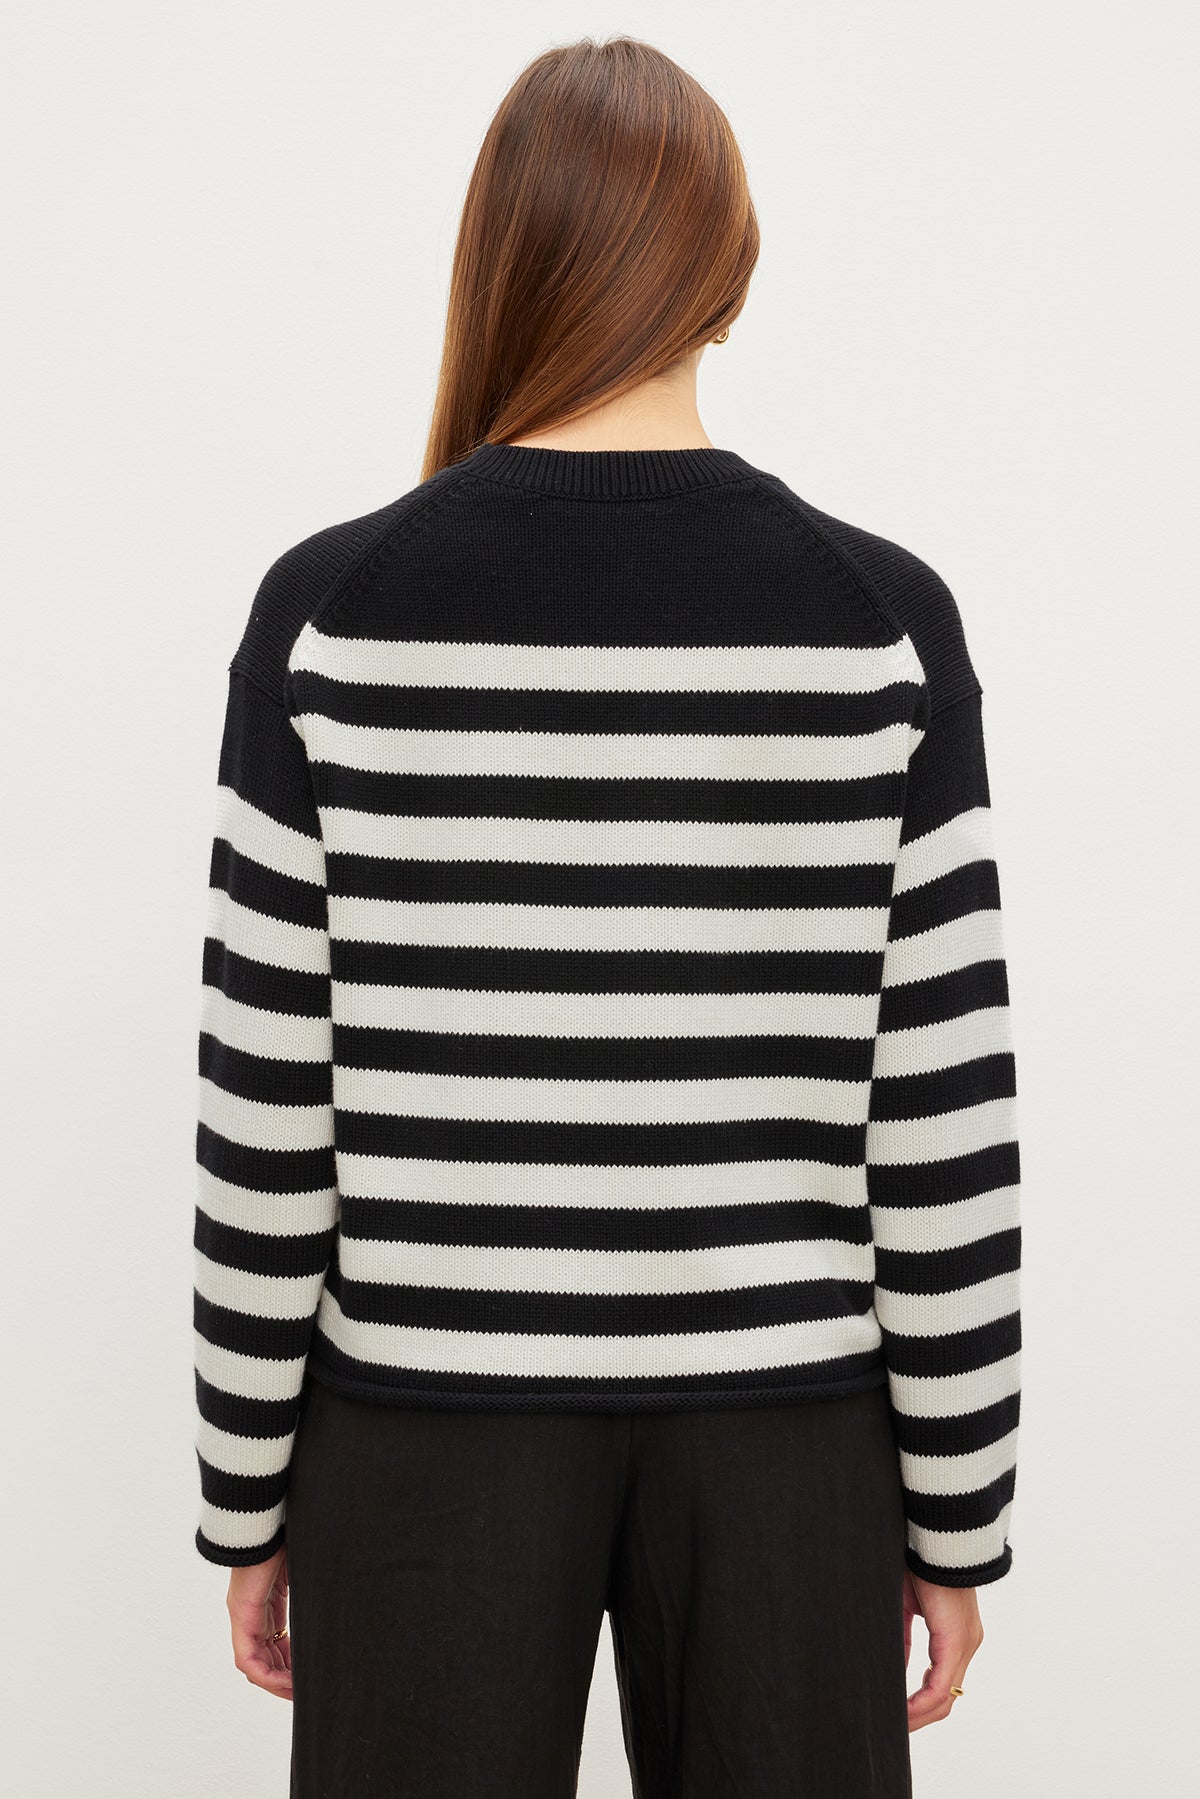 The modern silhouette of a woman wearing a Velvet by Graham & Spencer LEX STRIPED CREW NECK SWEATER.-35967621890241